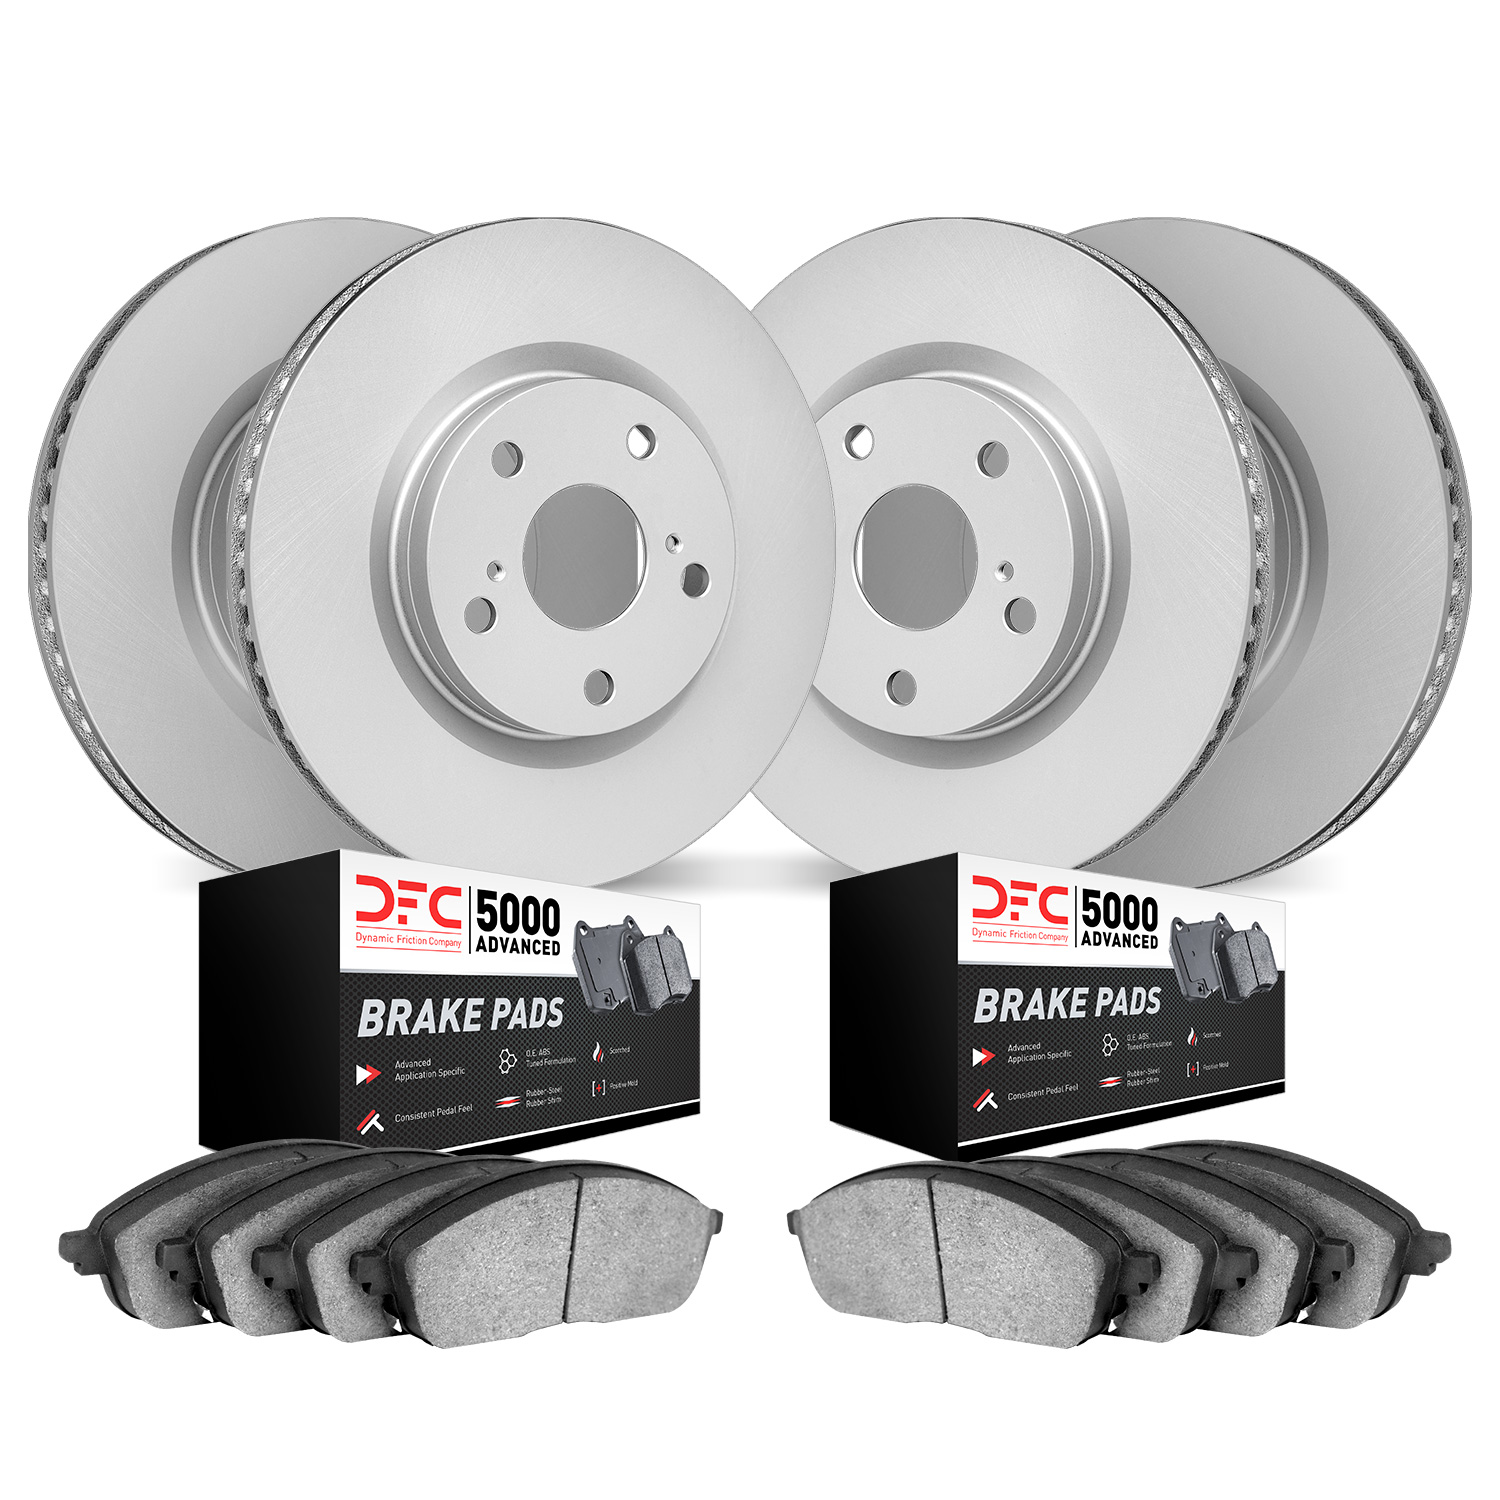 4504-63086 Geospec Brake Rotors w/5000 Advanced Brake Pads Kit, 2007-2014 Mercedes-Benz, Position: Front and Rear